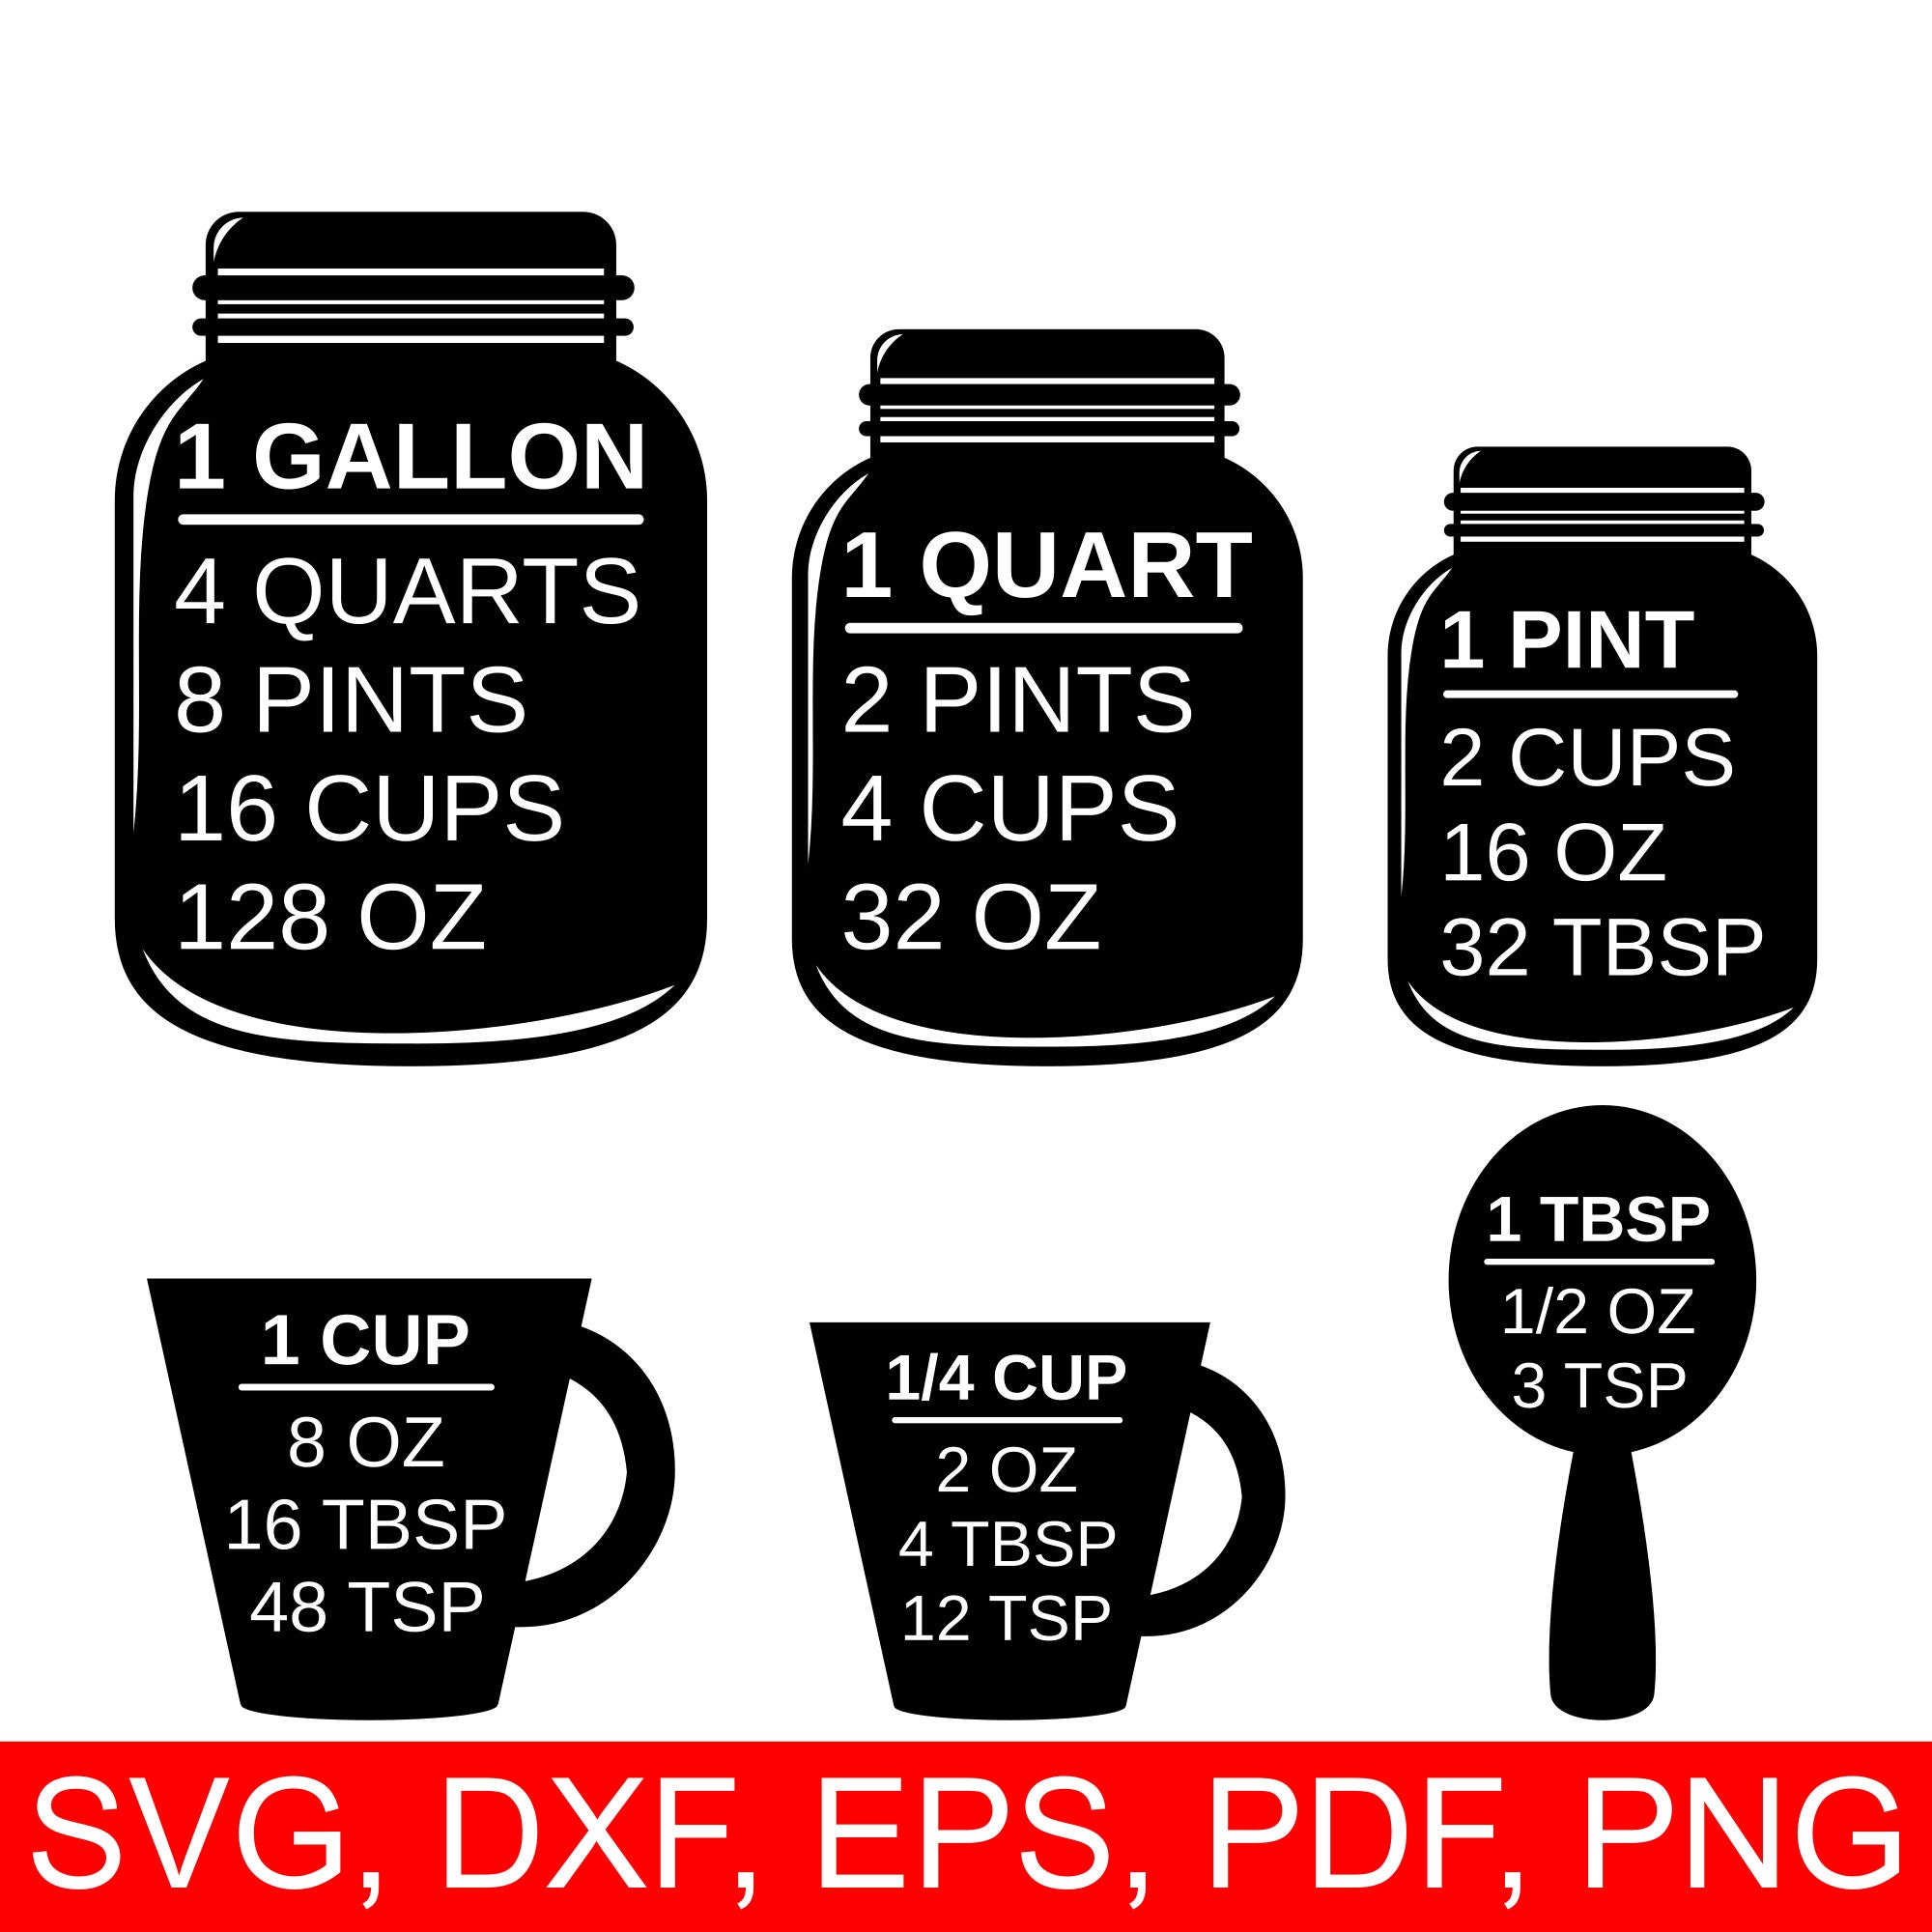 measuring-cups-svg-file-a-printable-kitchen-conversion-chart-cheat-sheet-to-easily-convert